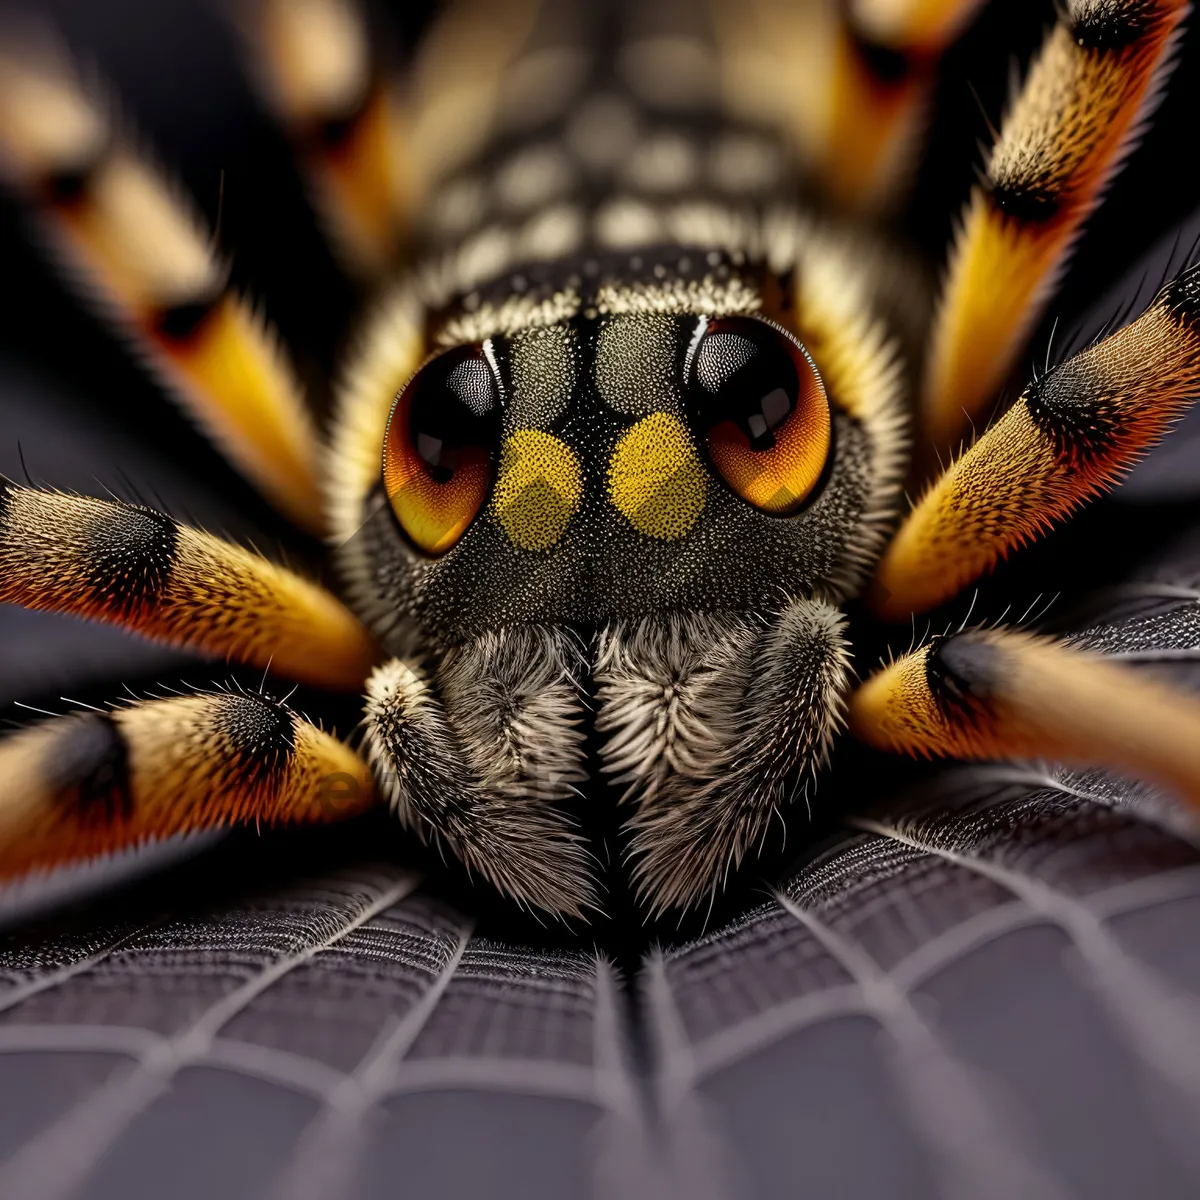 Picture of Black and Gold Arachnid Close-Up